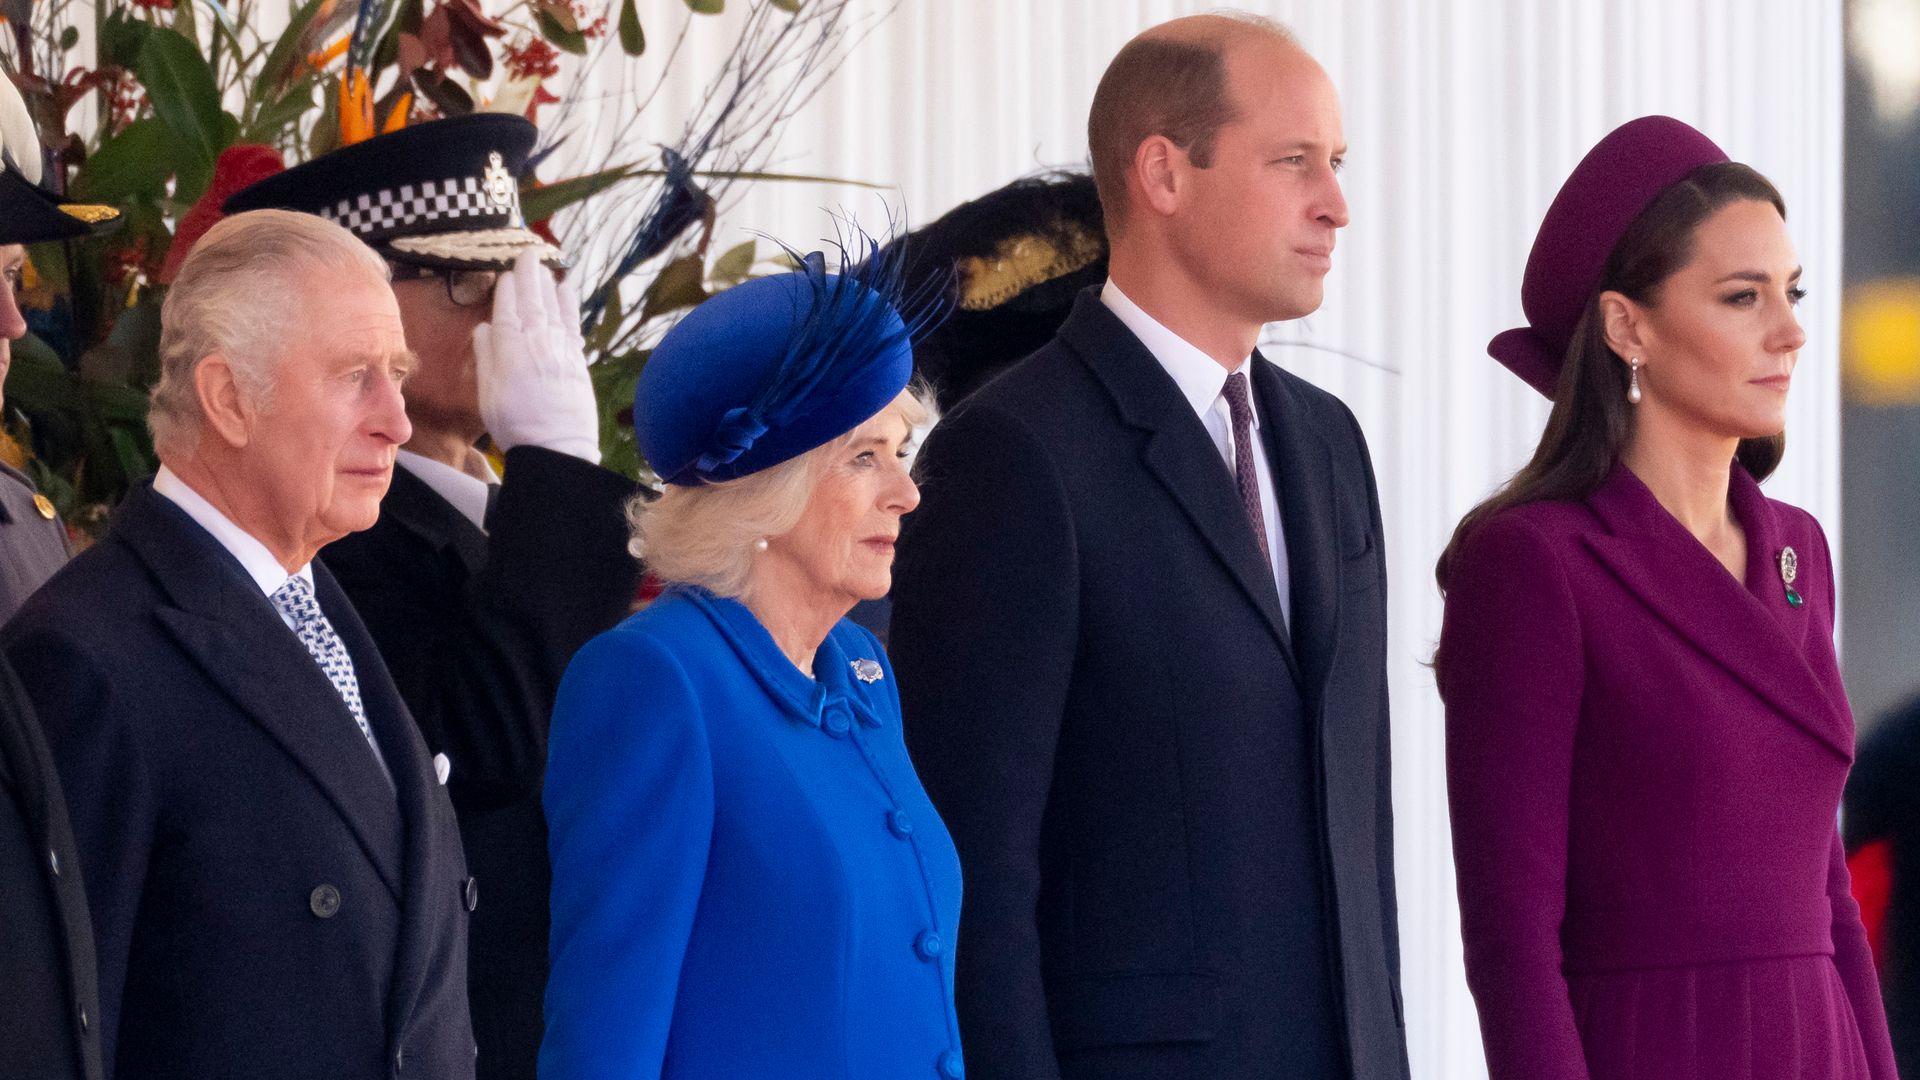 Charles, Camilla, William and Kate at ceremonial welcome for South Africa state visit